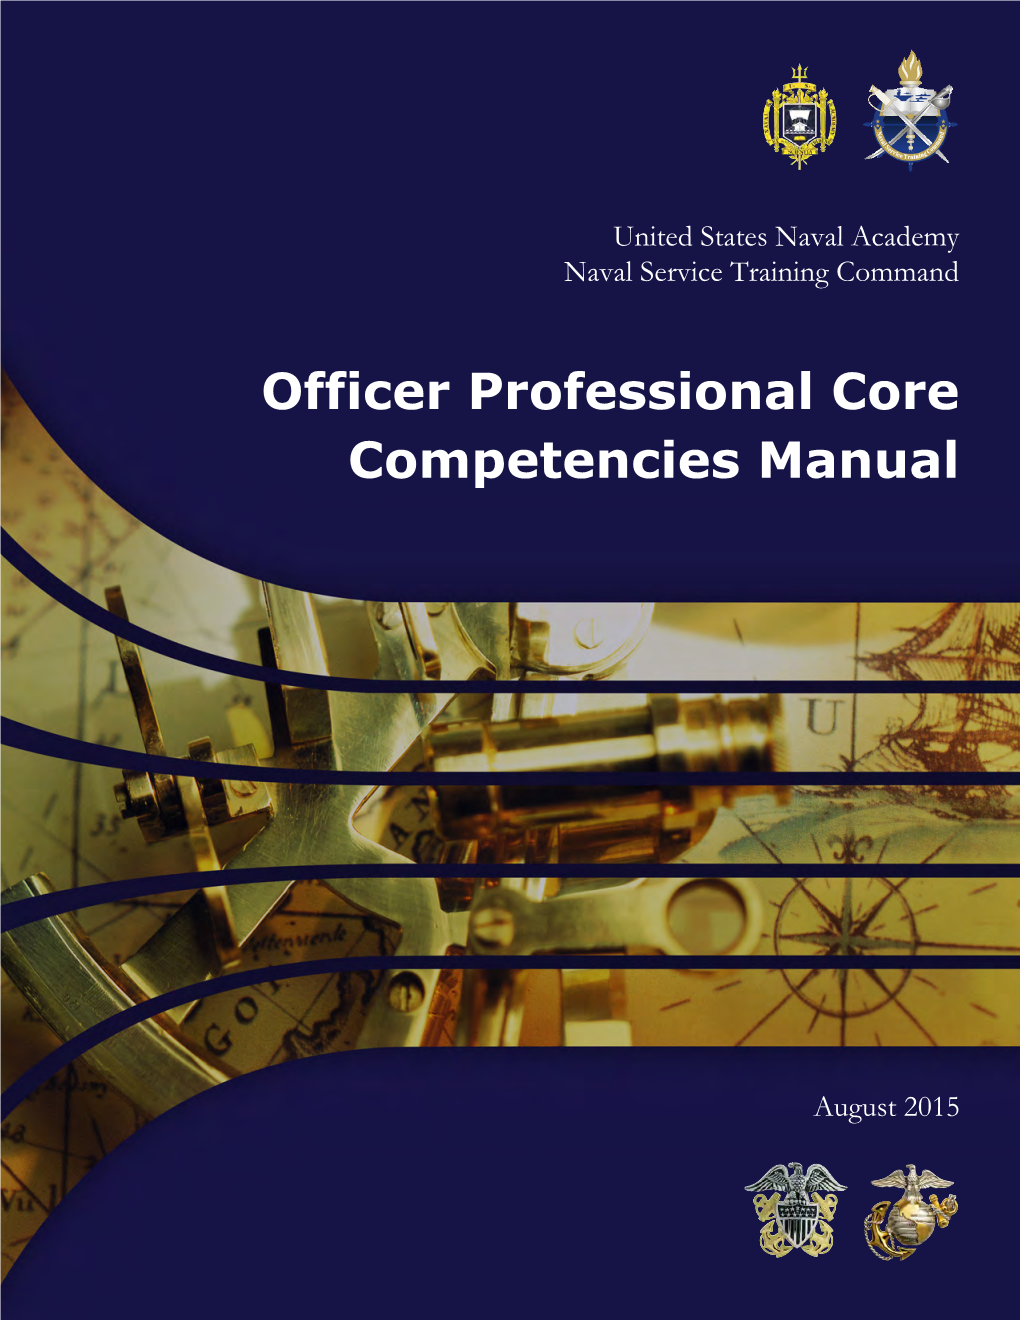 Officer Professional Core Competencies Manual ‐ August 2015